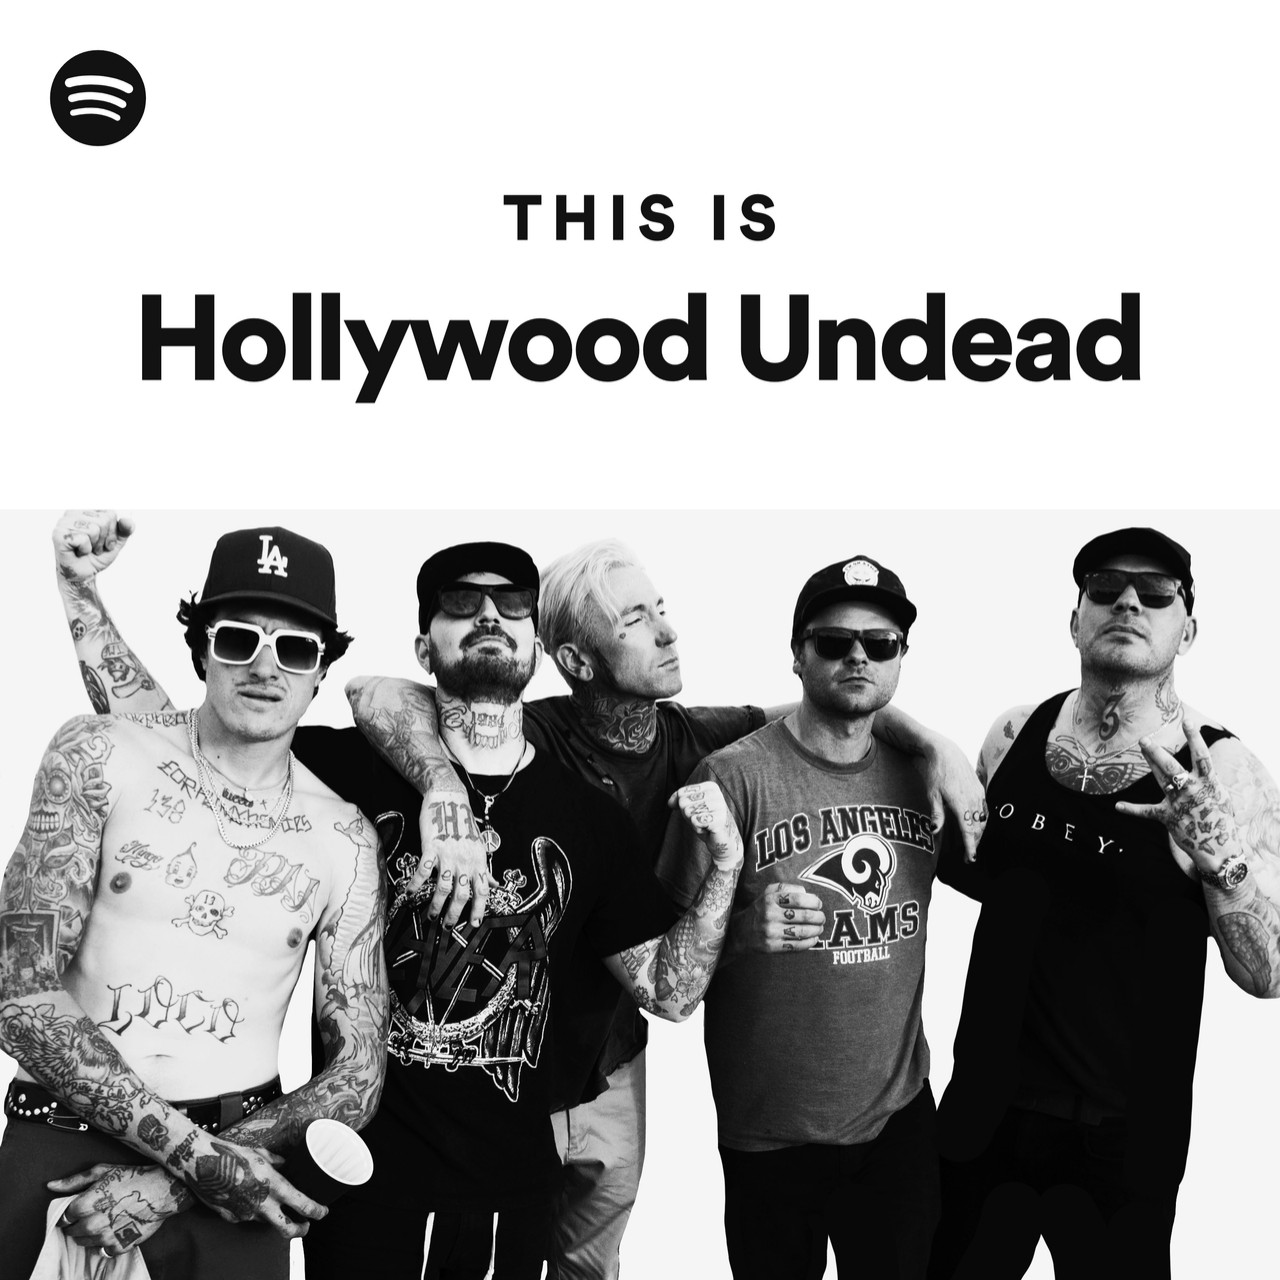 This Is Hollywood Undead